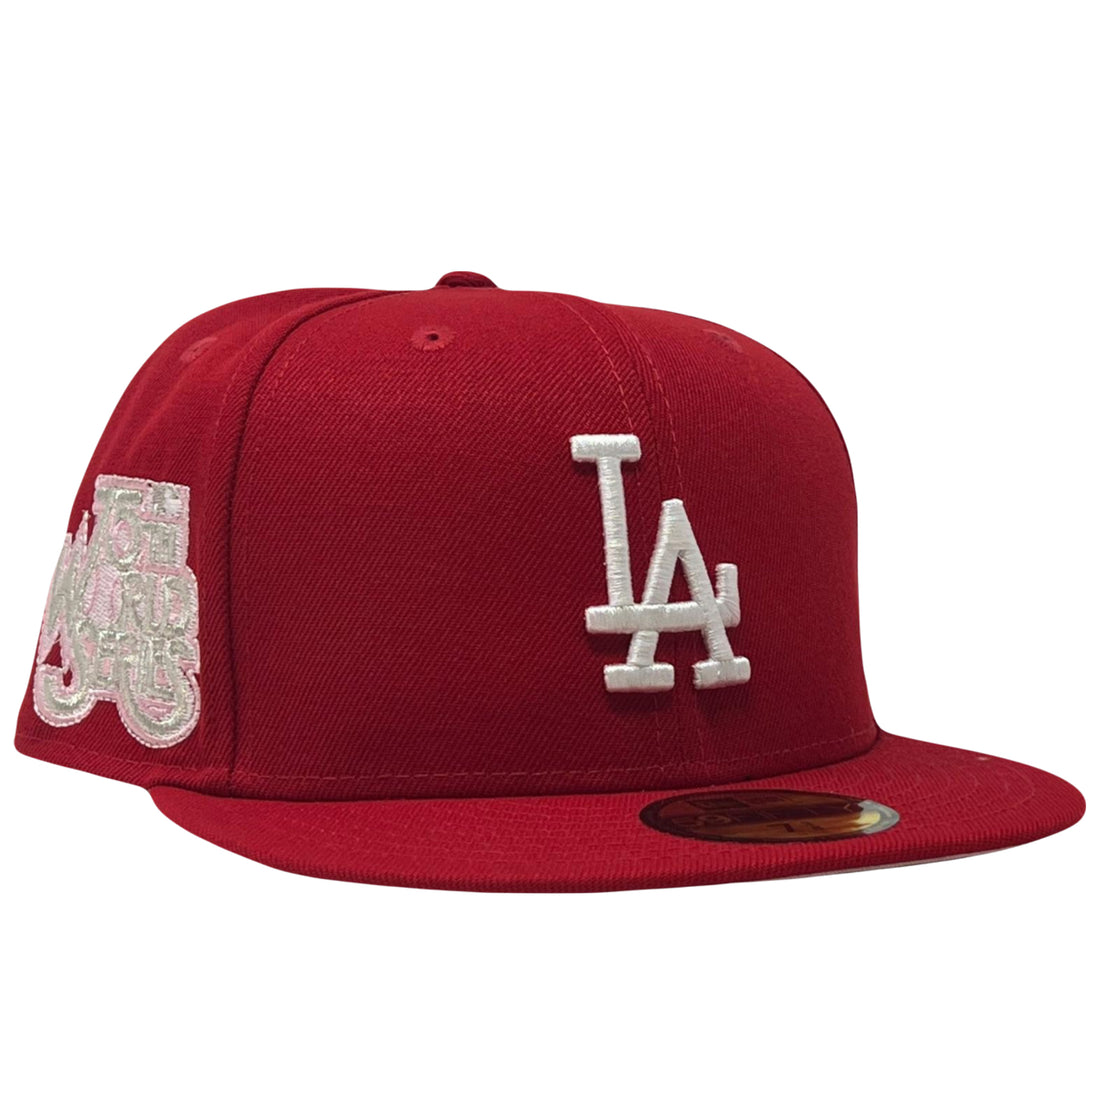 Los Angeles Dodgers 75th World Series Pink Brim New Era Fitted Hat